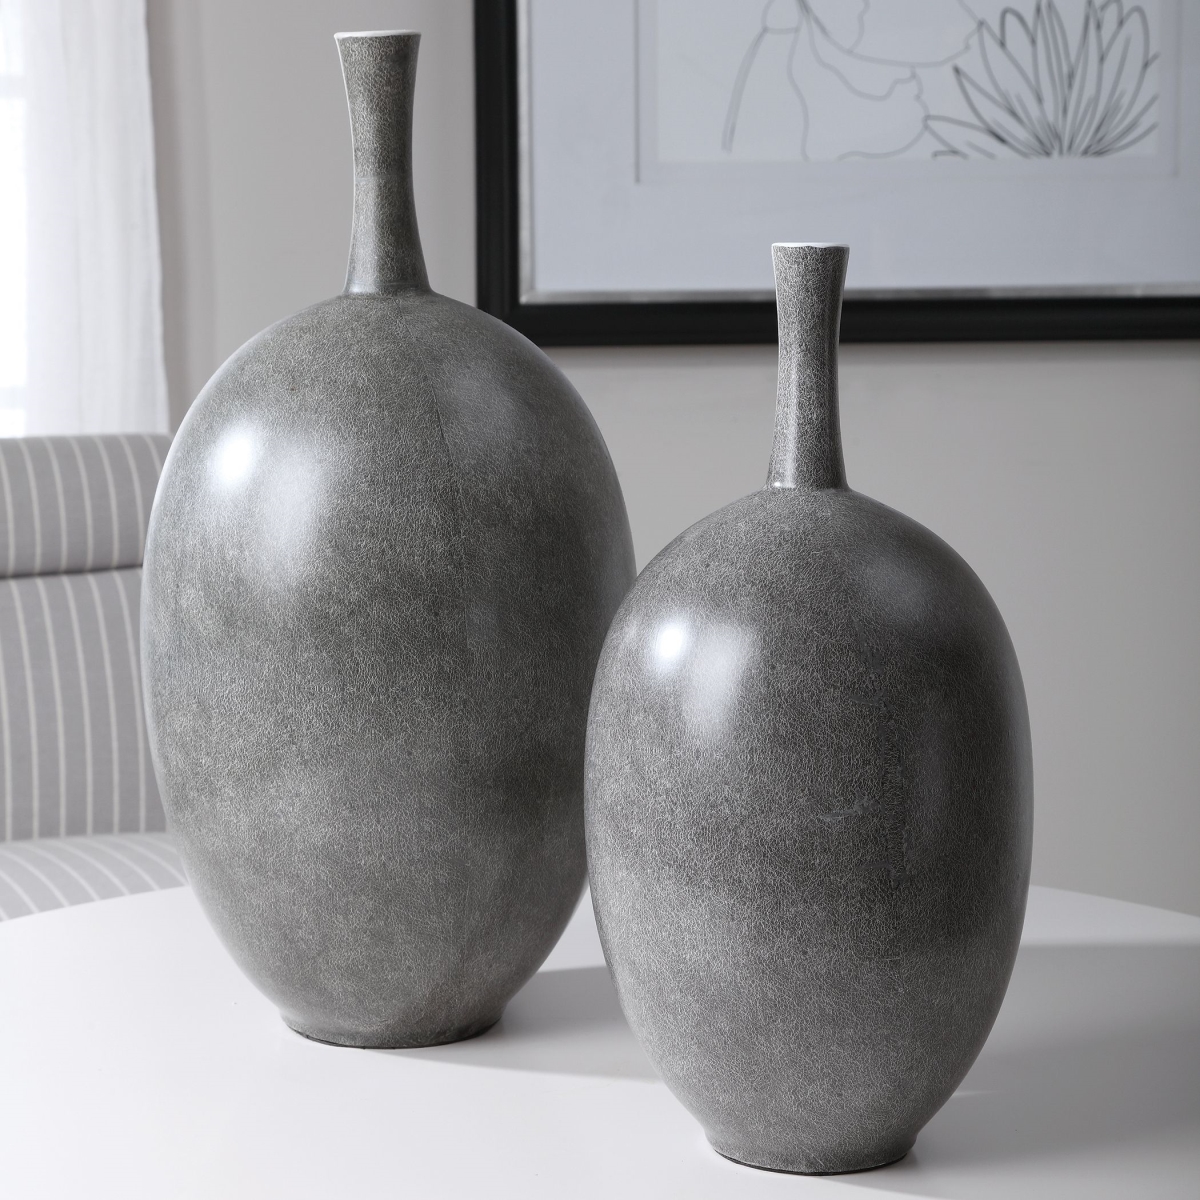 Picture of 212 Main 17711 13 x 37.5 x 13 in. Riordan Modern Vases  Set of 2